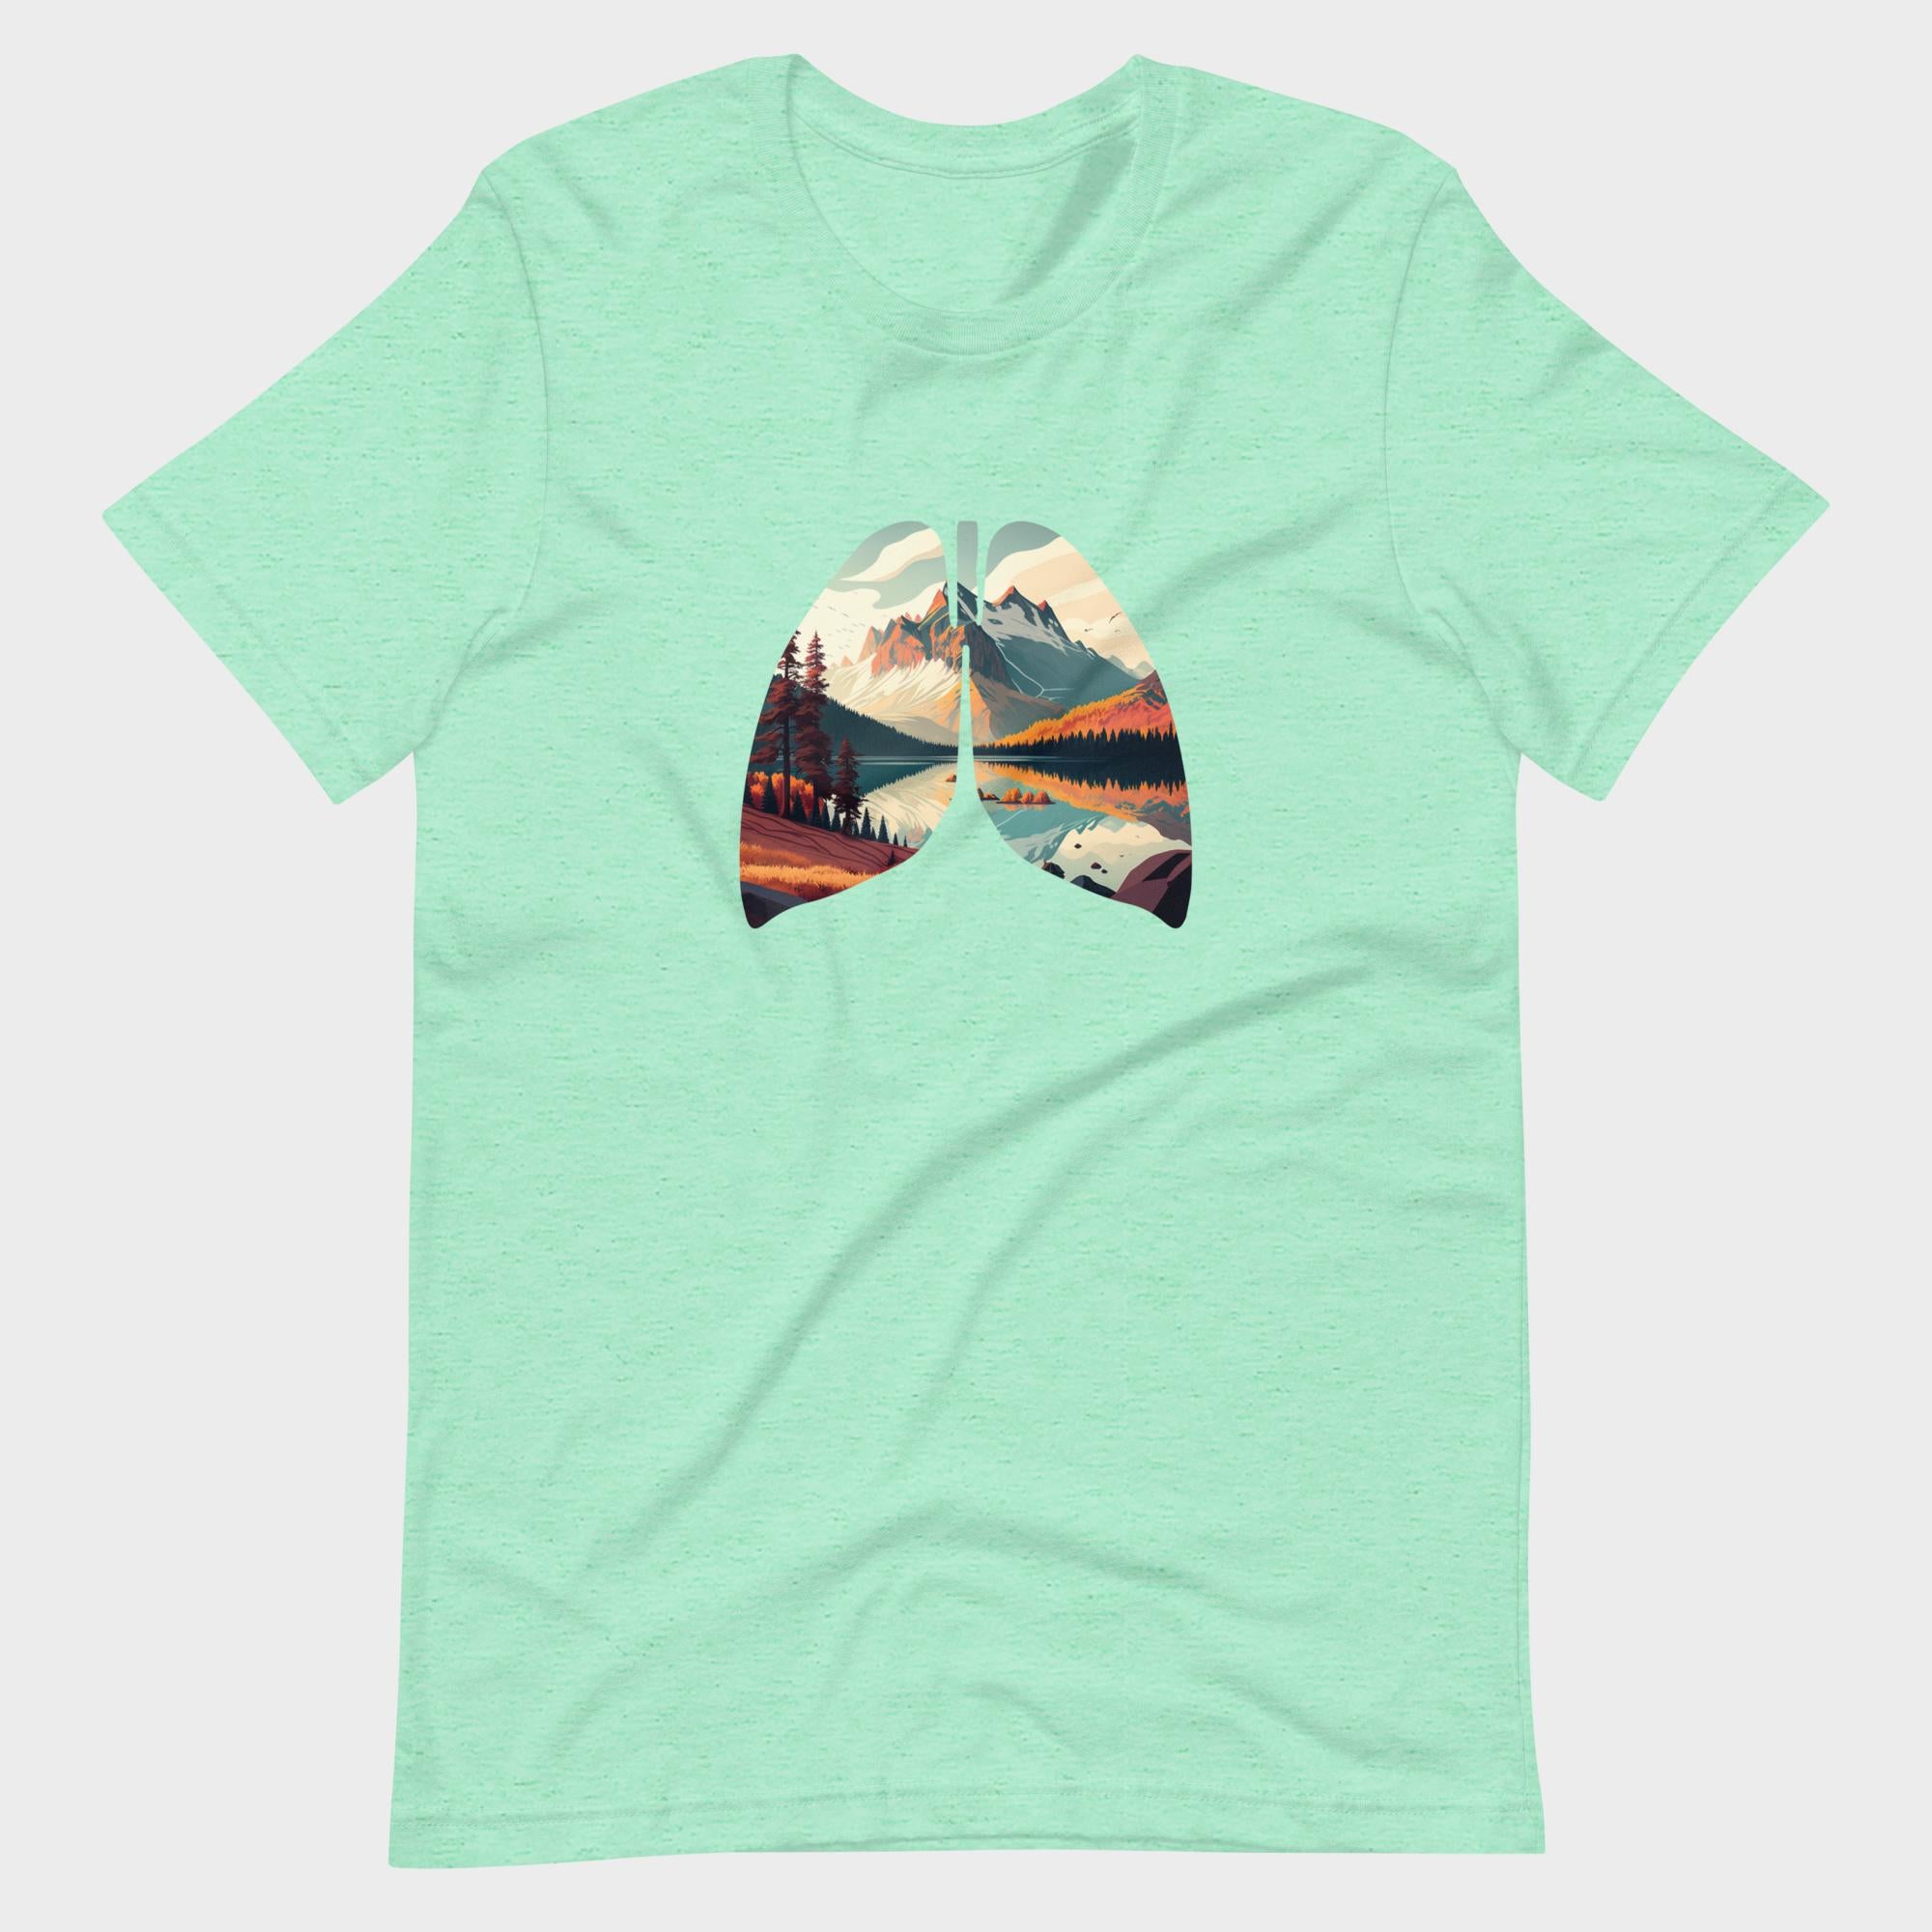 Breathe In Nature - T-Shirt